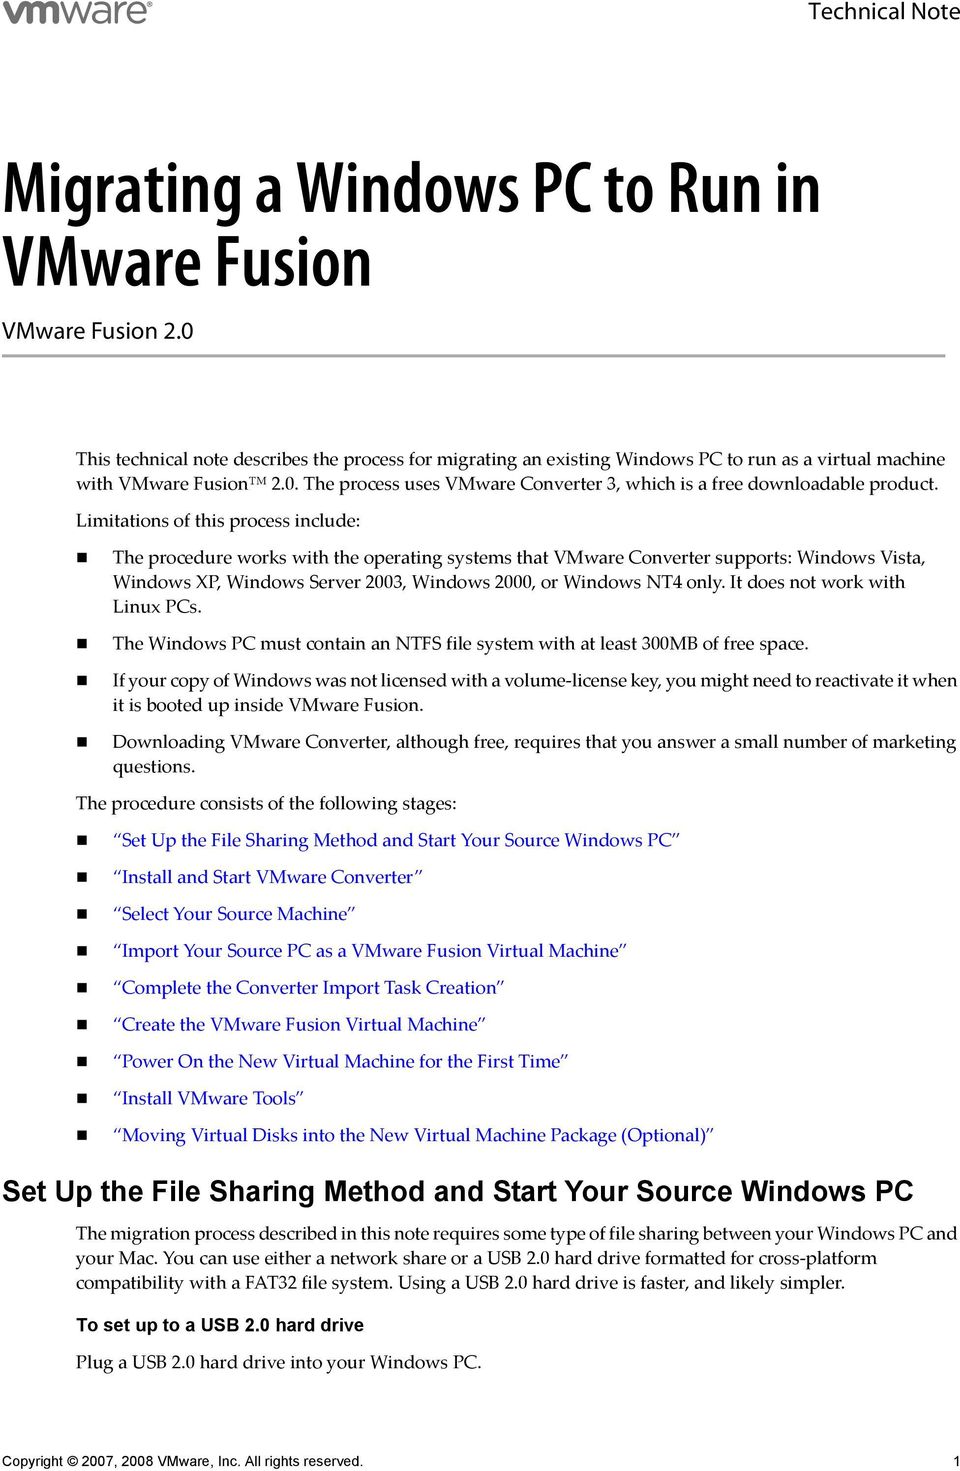 Limitations of this process include: The procedure works with the operating systems that VMware Converter supports: Windows Vista, Windows XP, Windows Server 2003, Windows 2000, or Windows NT4 only.